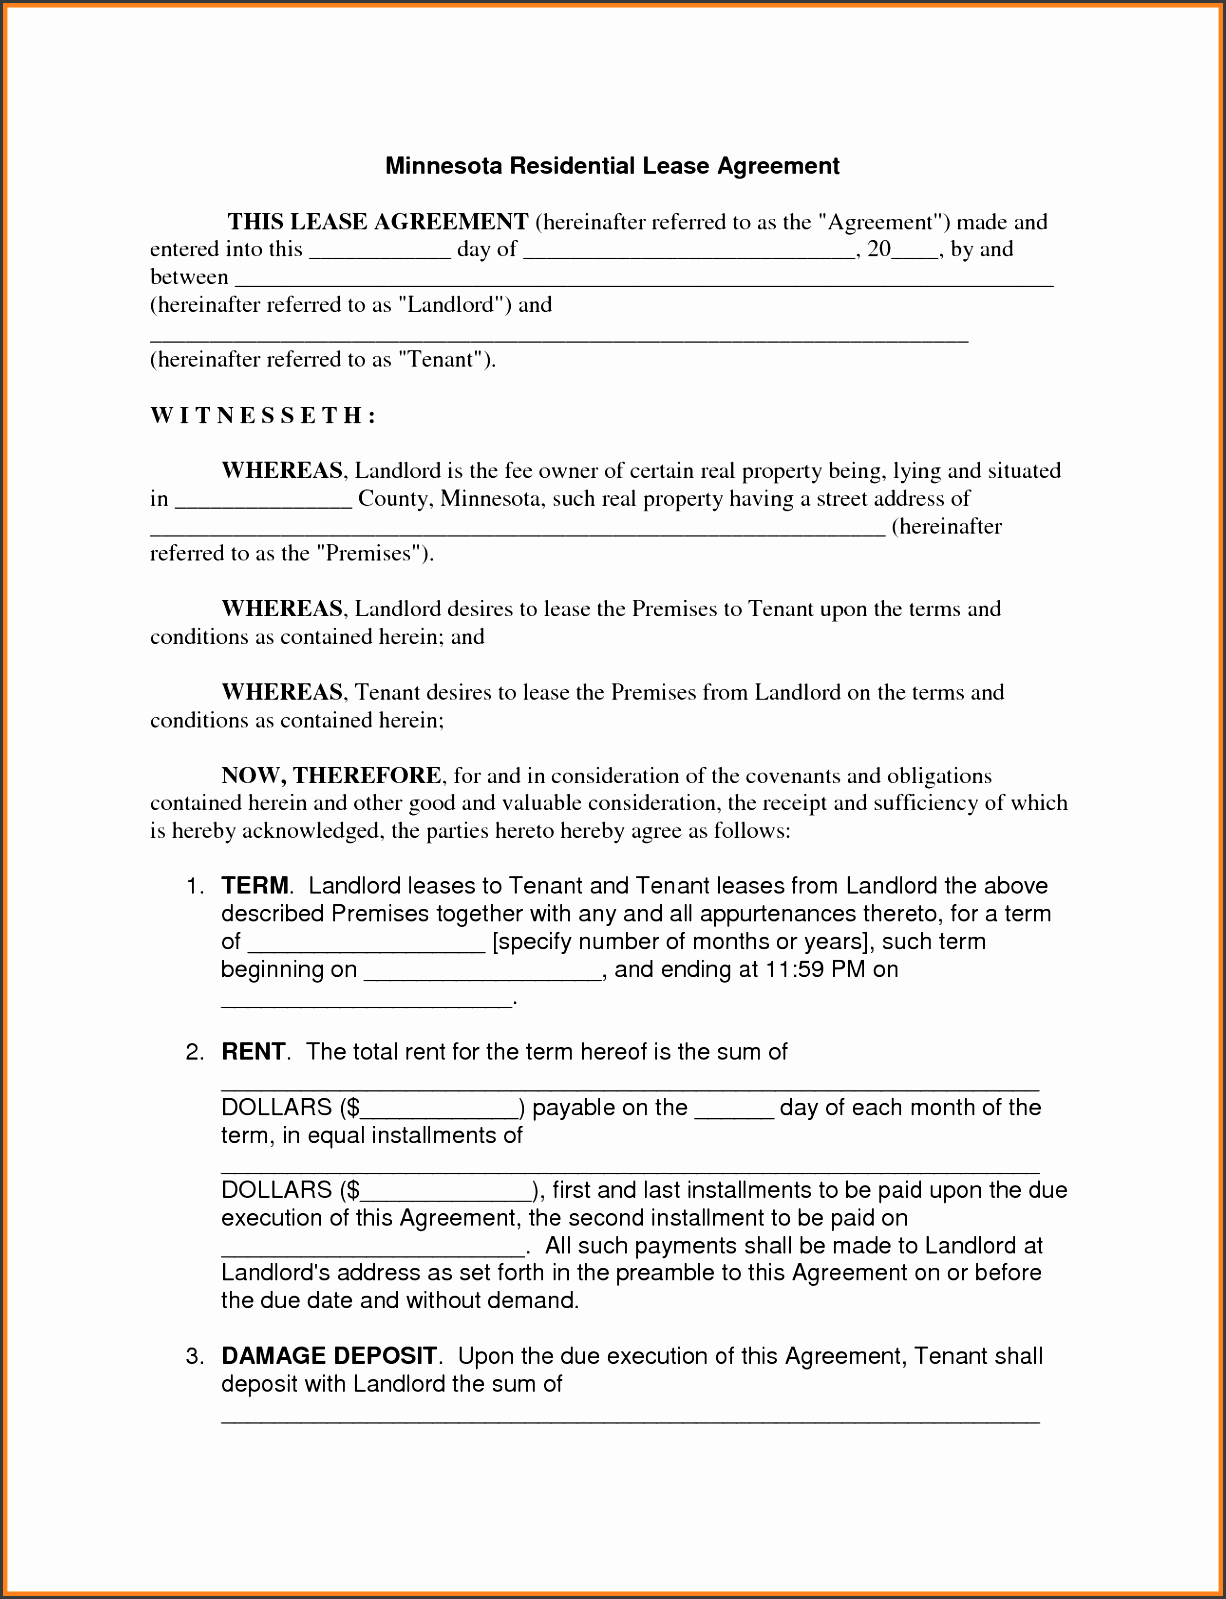 9 mercial property lease agreement sample purchase agreement mercial property lease agreement sample rental lease agreement